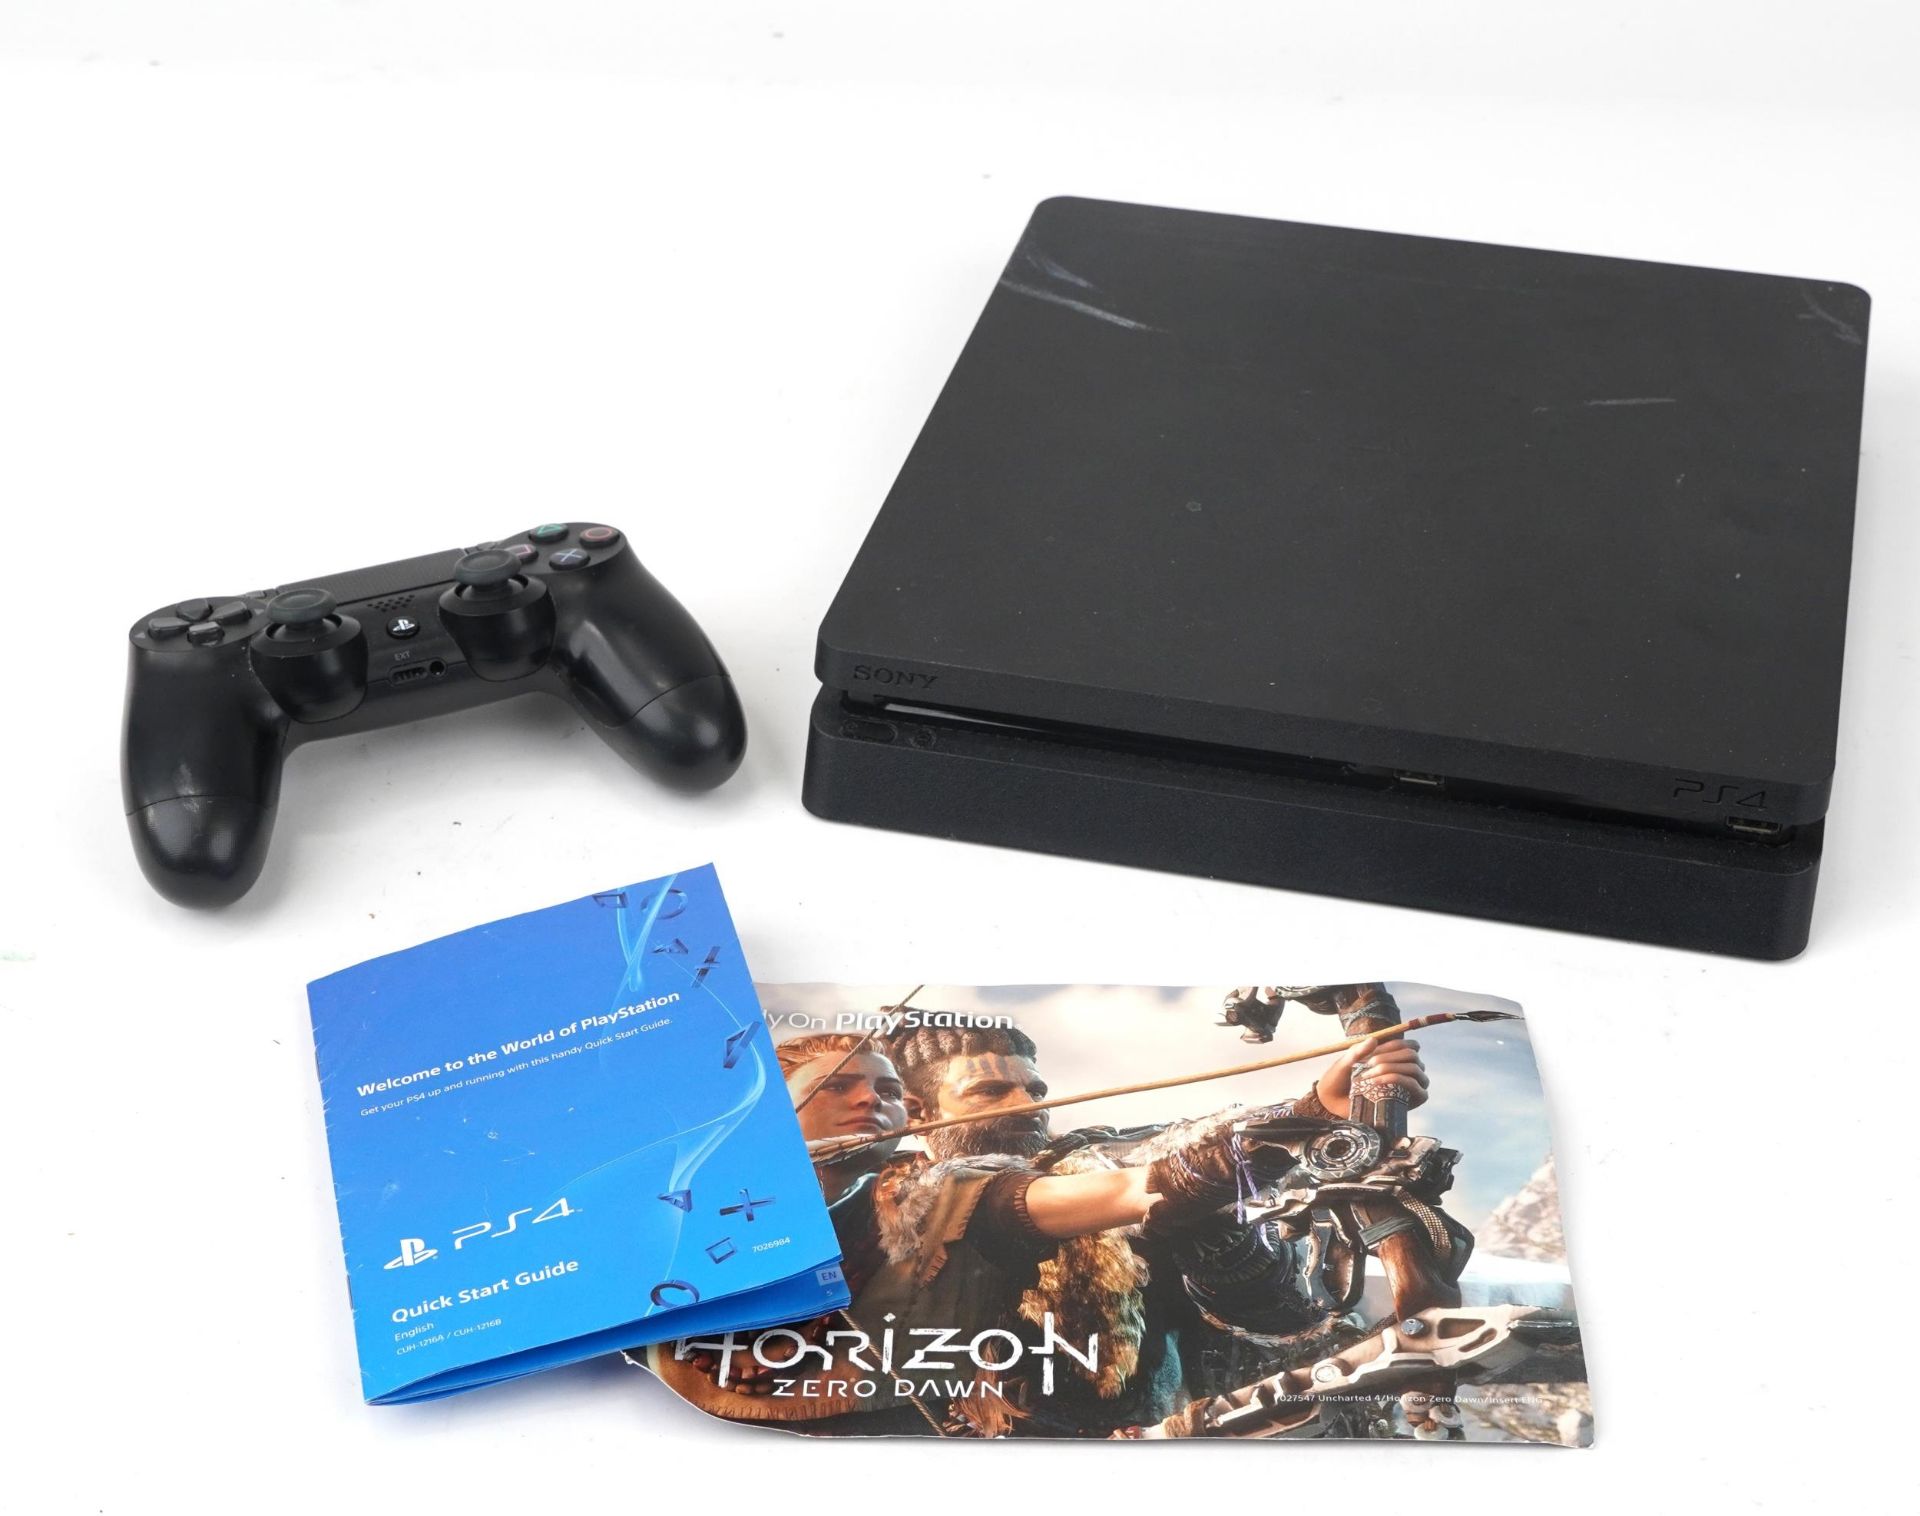 Sony PlayStation 4 games console with controller